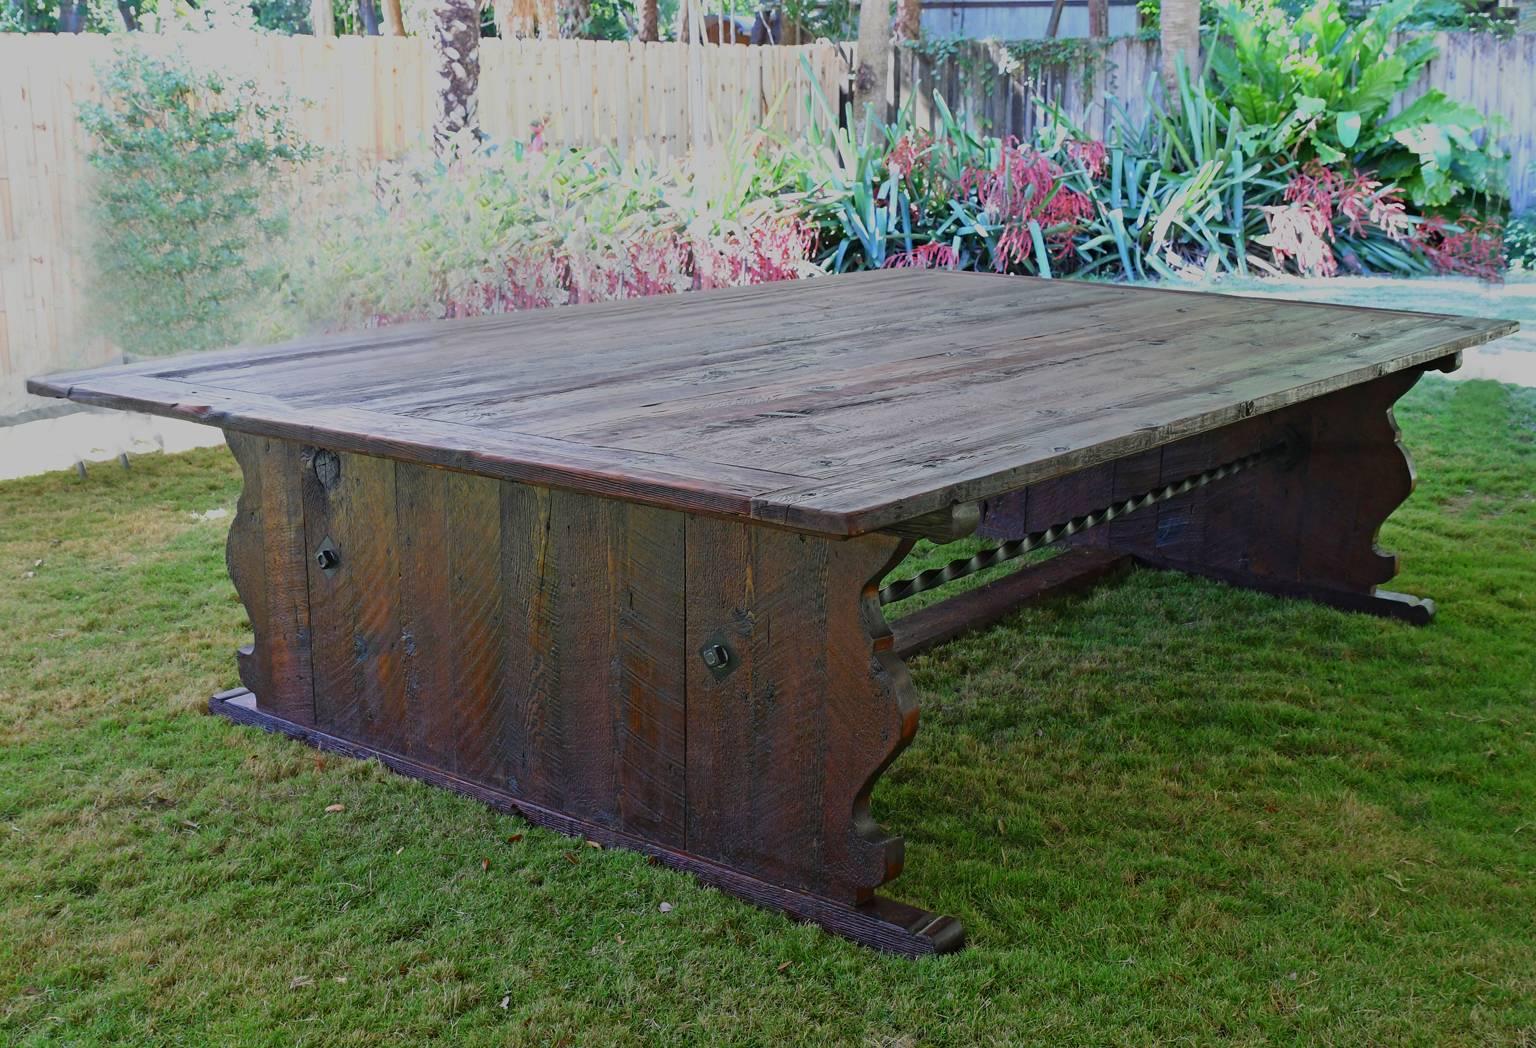 **This table is custom made and lead time is 5-6 weeks. It is not immediately available.**

This table is available as shown or it can be ordered in custom sives and a variety of woods and finishes.
Made from repurposed Tamarac wood, this rugged and